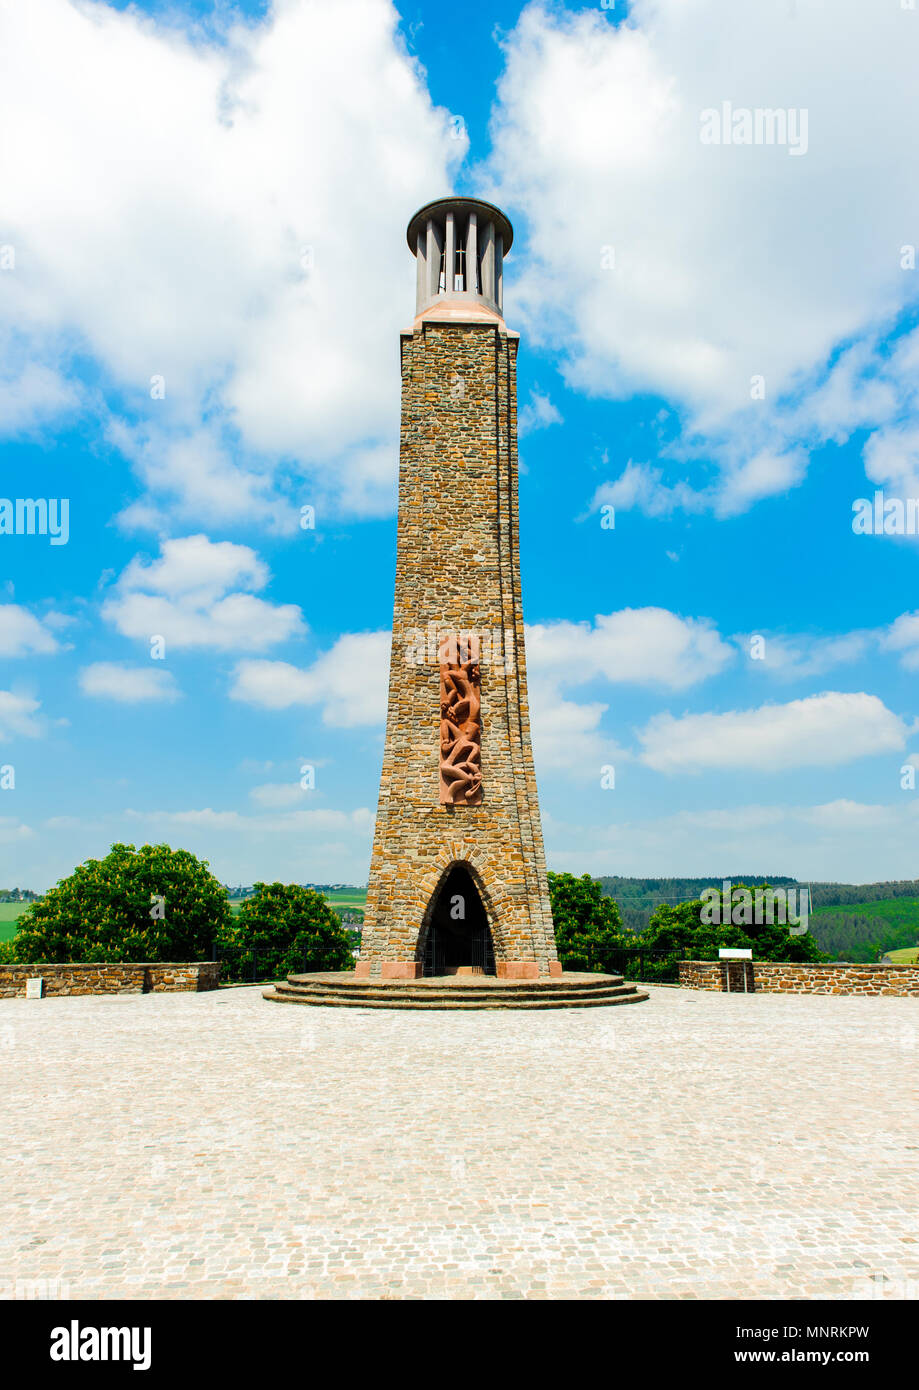 Streikdenkmal monument, Wiltz, Luxembourg. This memorial commemorates the national strike of Luxembourg in 1942. Stock Photo